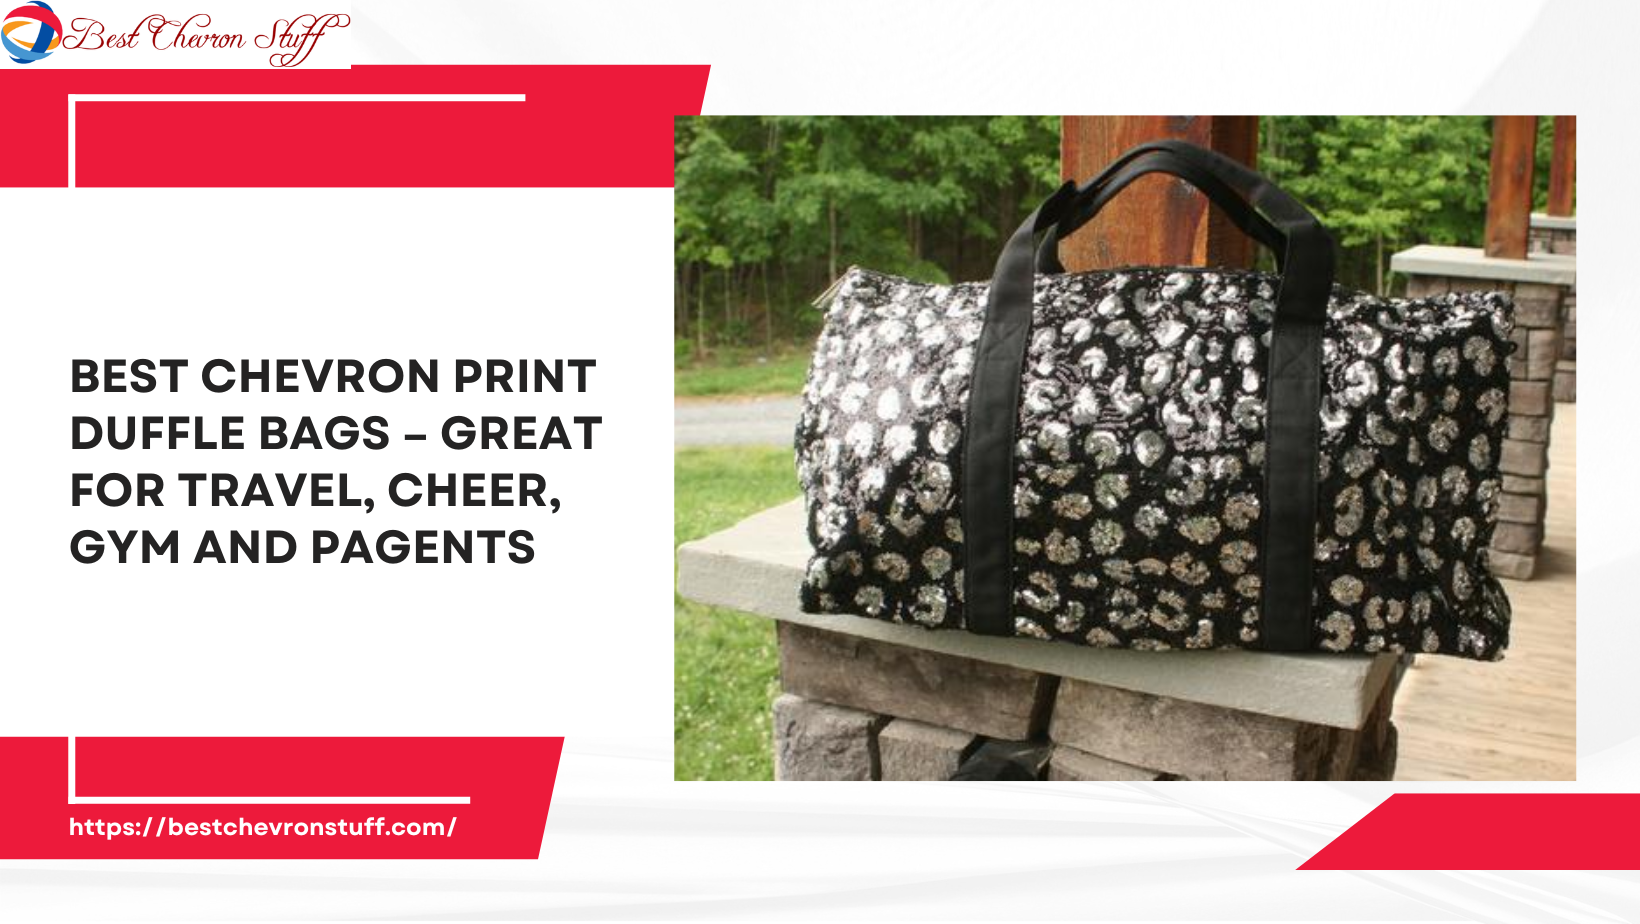 Best Chevron Print Duffle Bags – Great for Travel, Cheer, Gym and Pagents